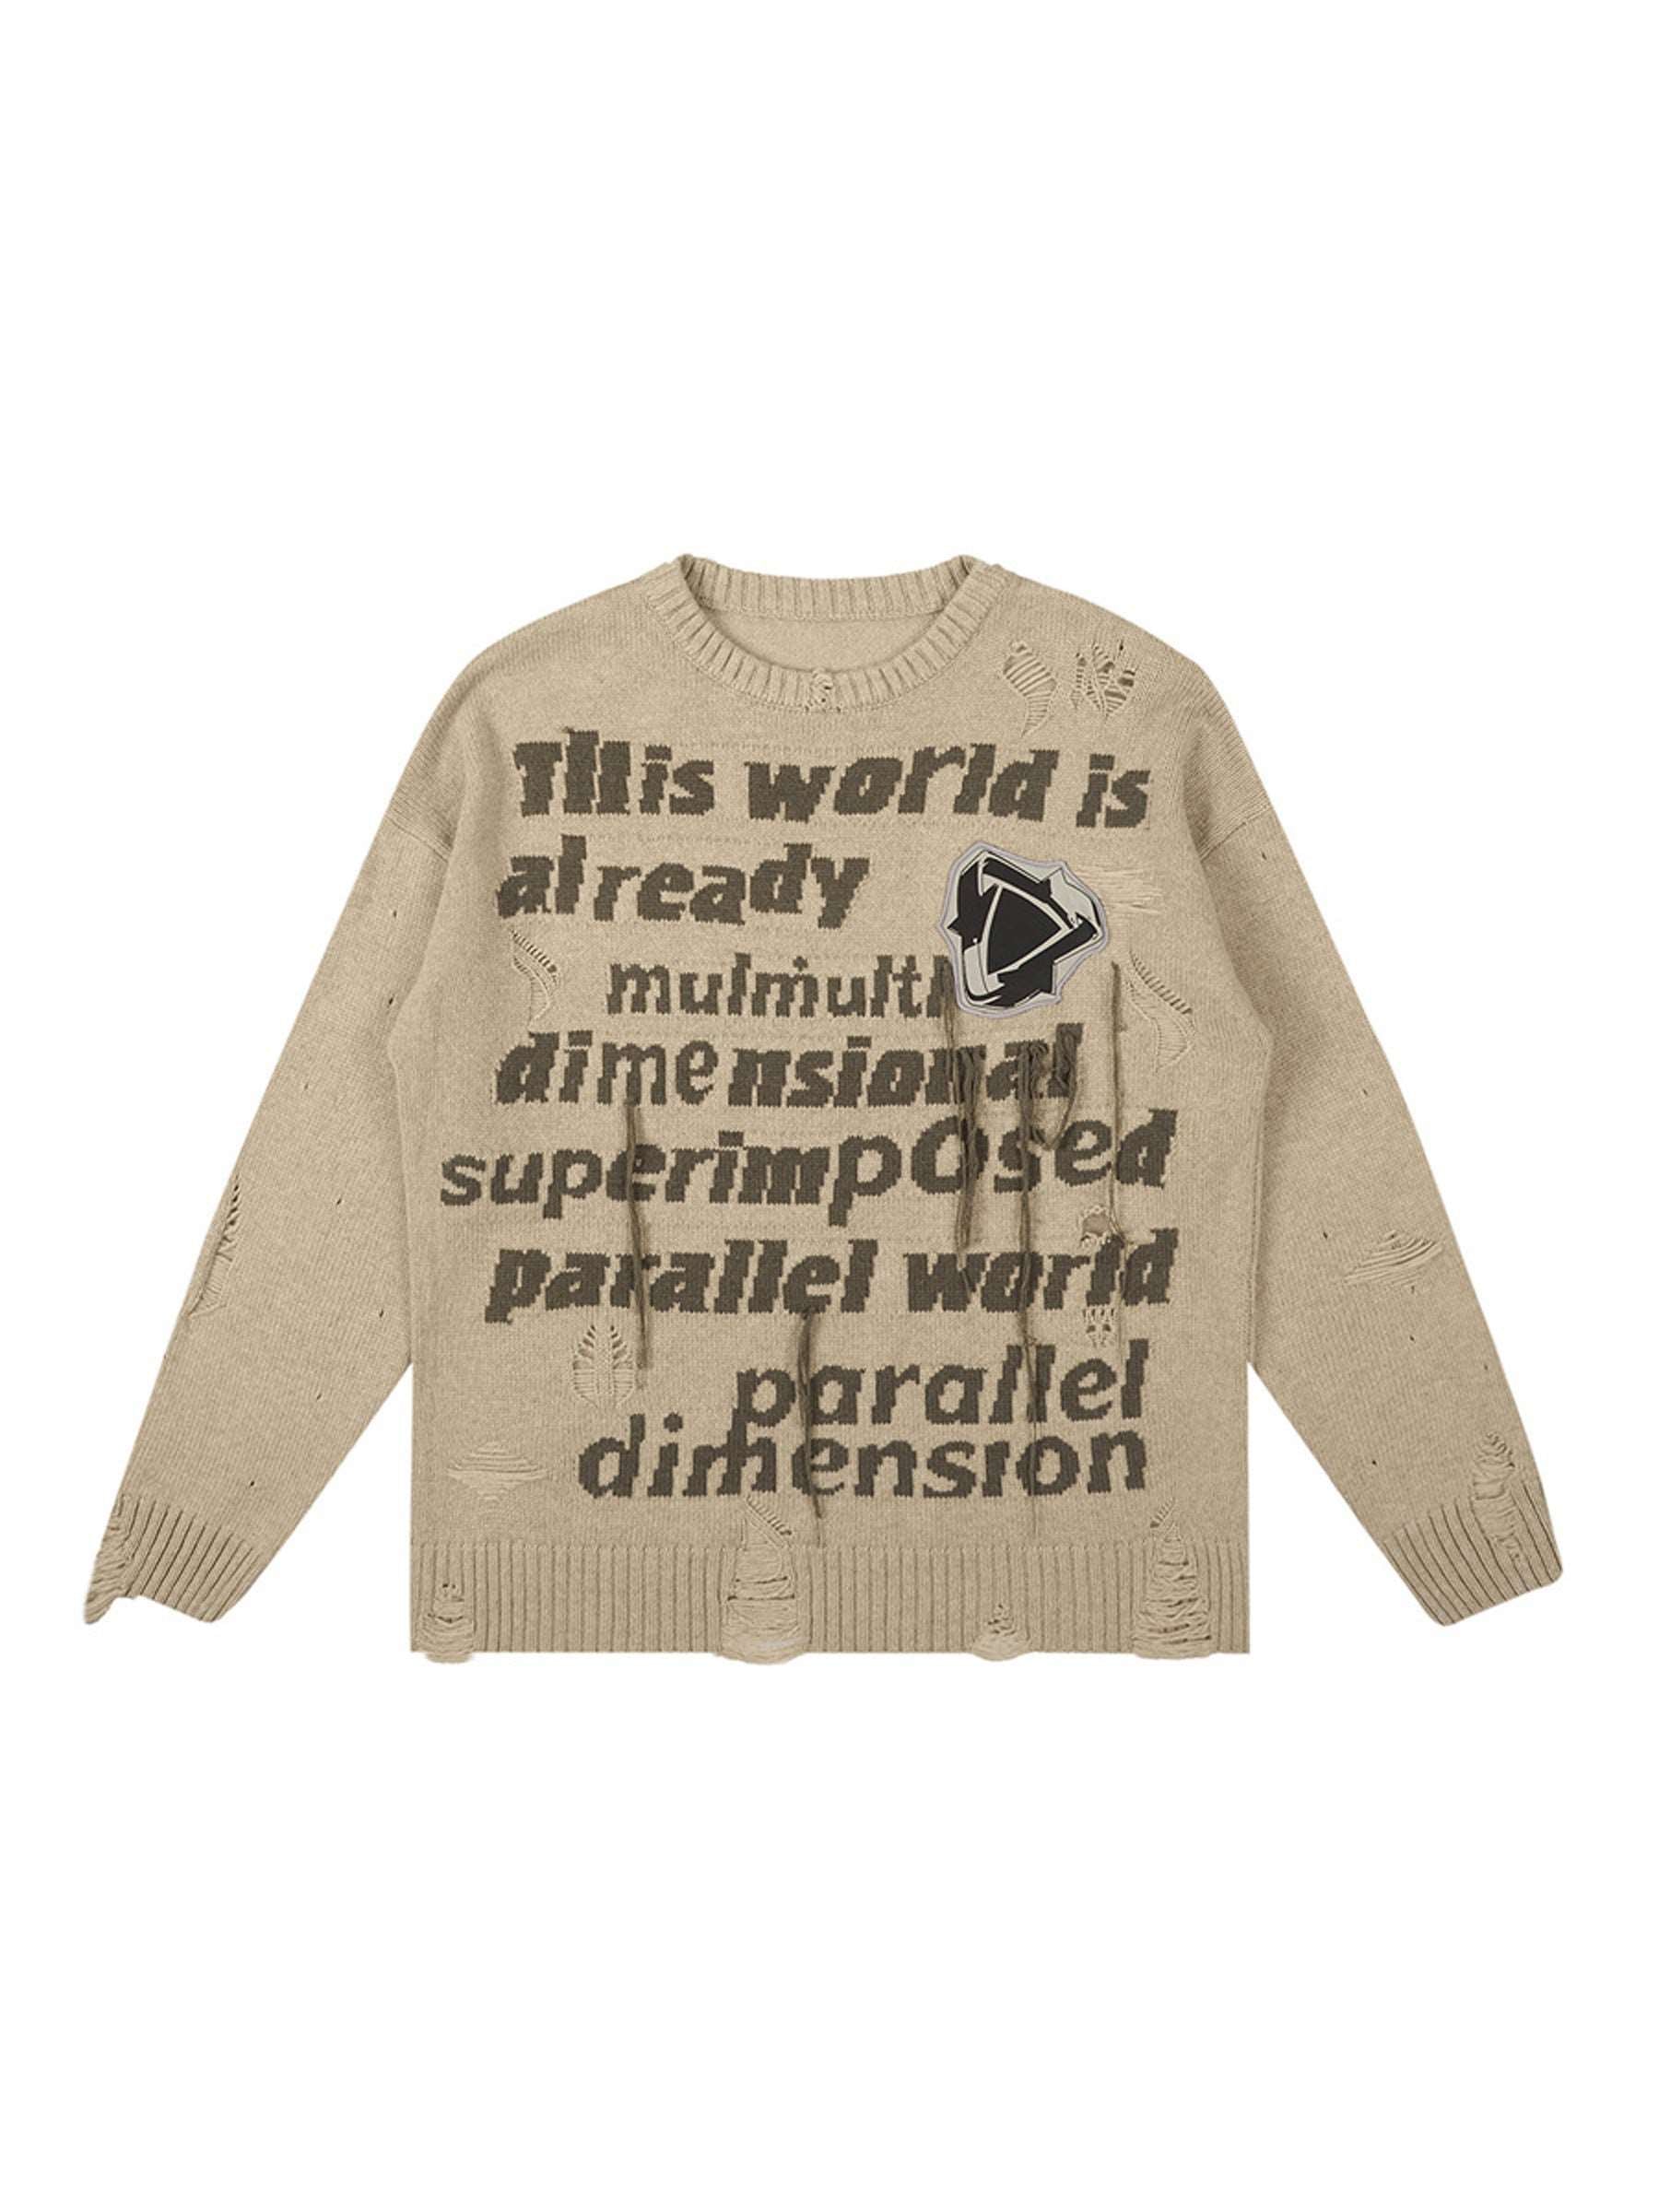 BNP Parallel Dimension Distressed Sweater